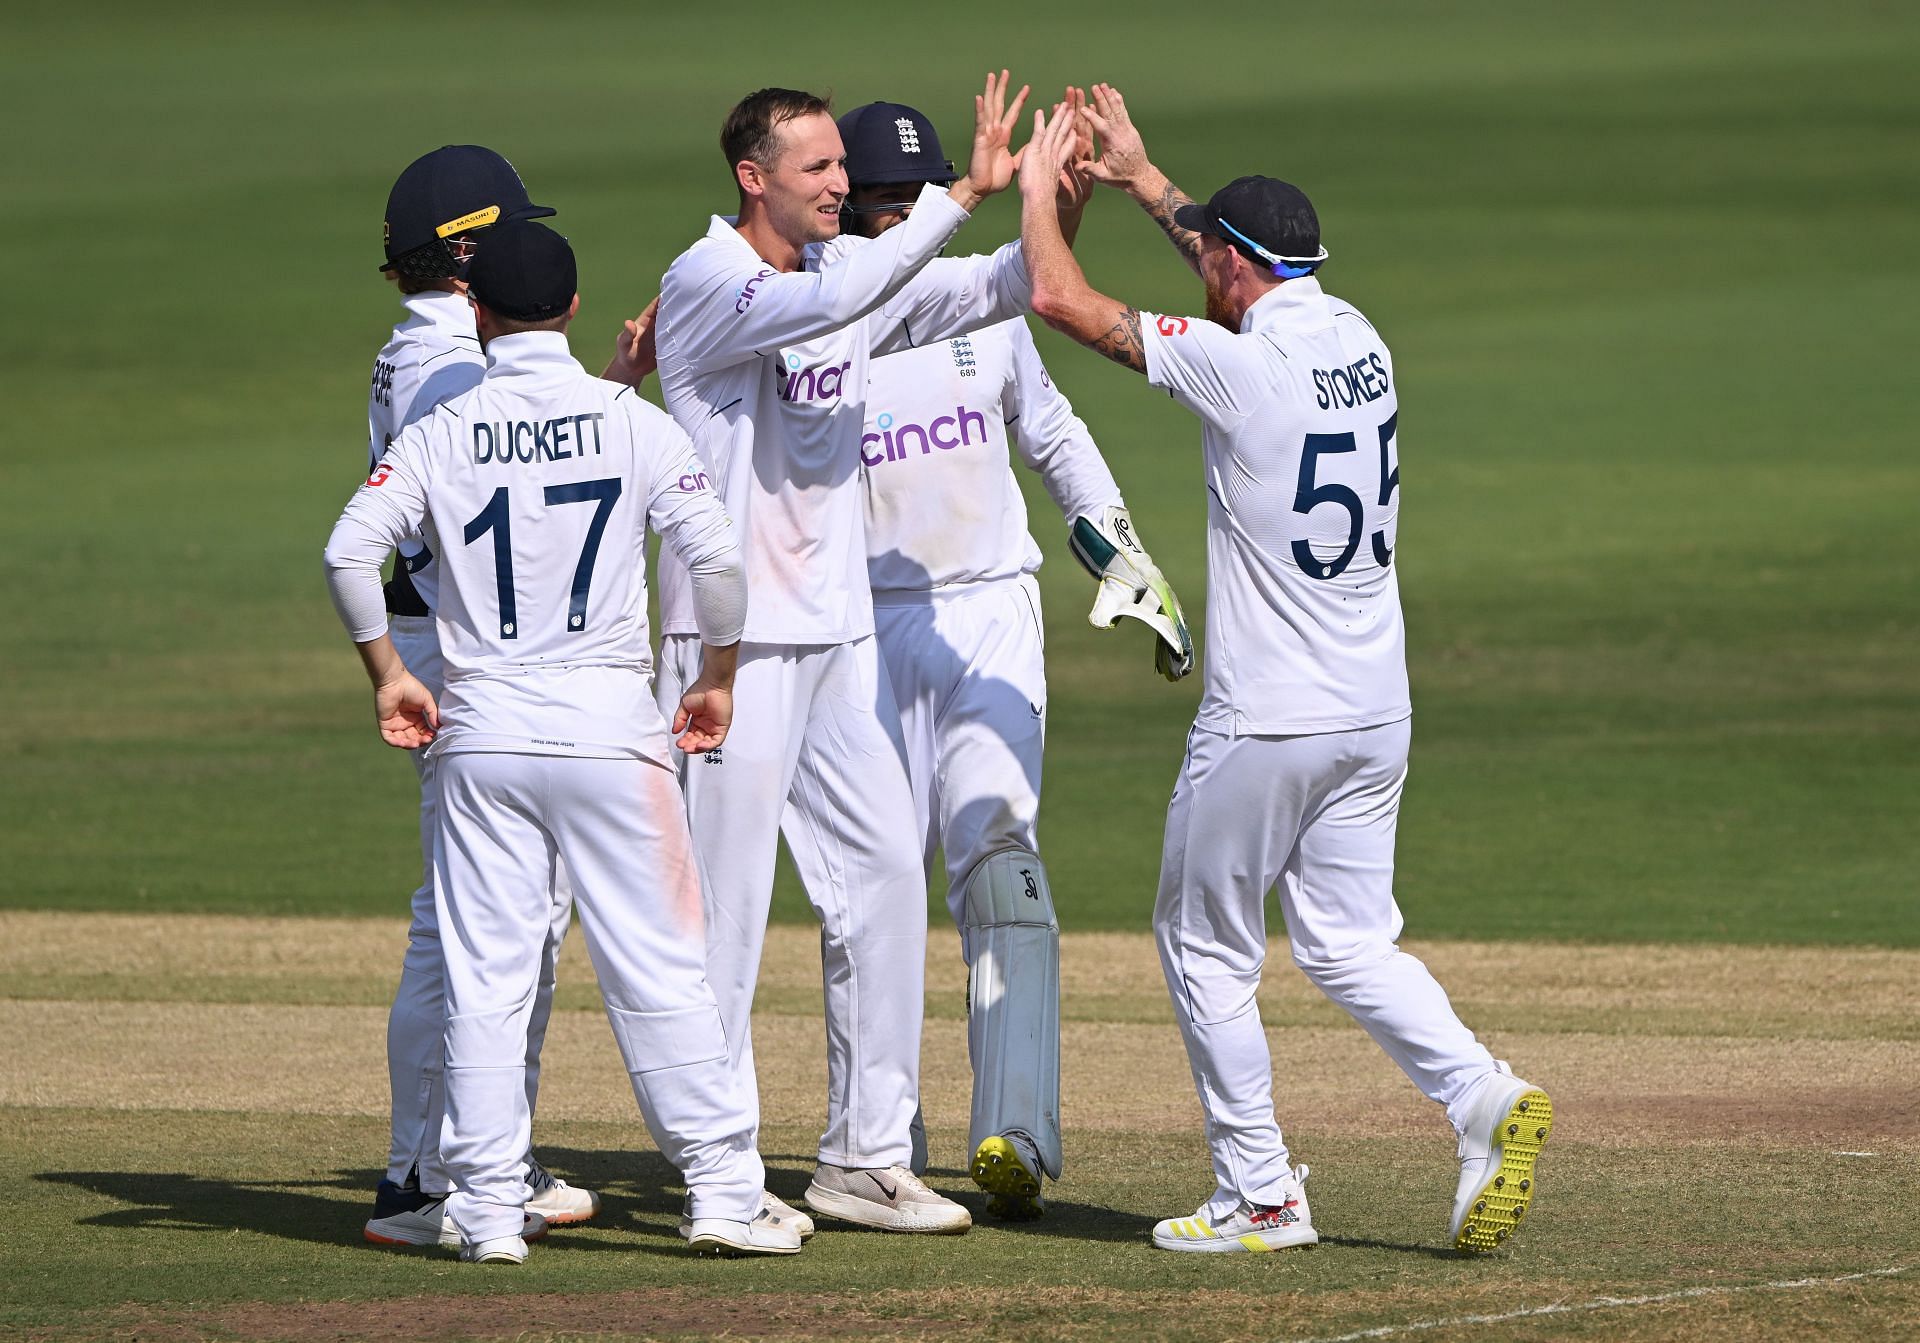 Debutant Tom Hartley claimed seven wickets in the second innings. (Pic: Getty Images)